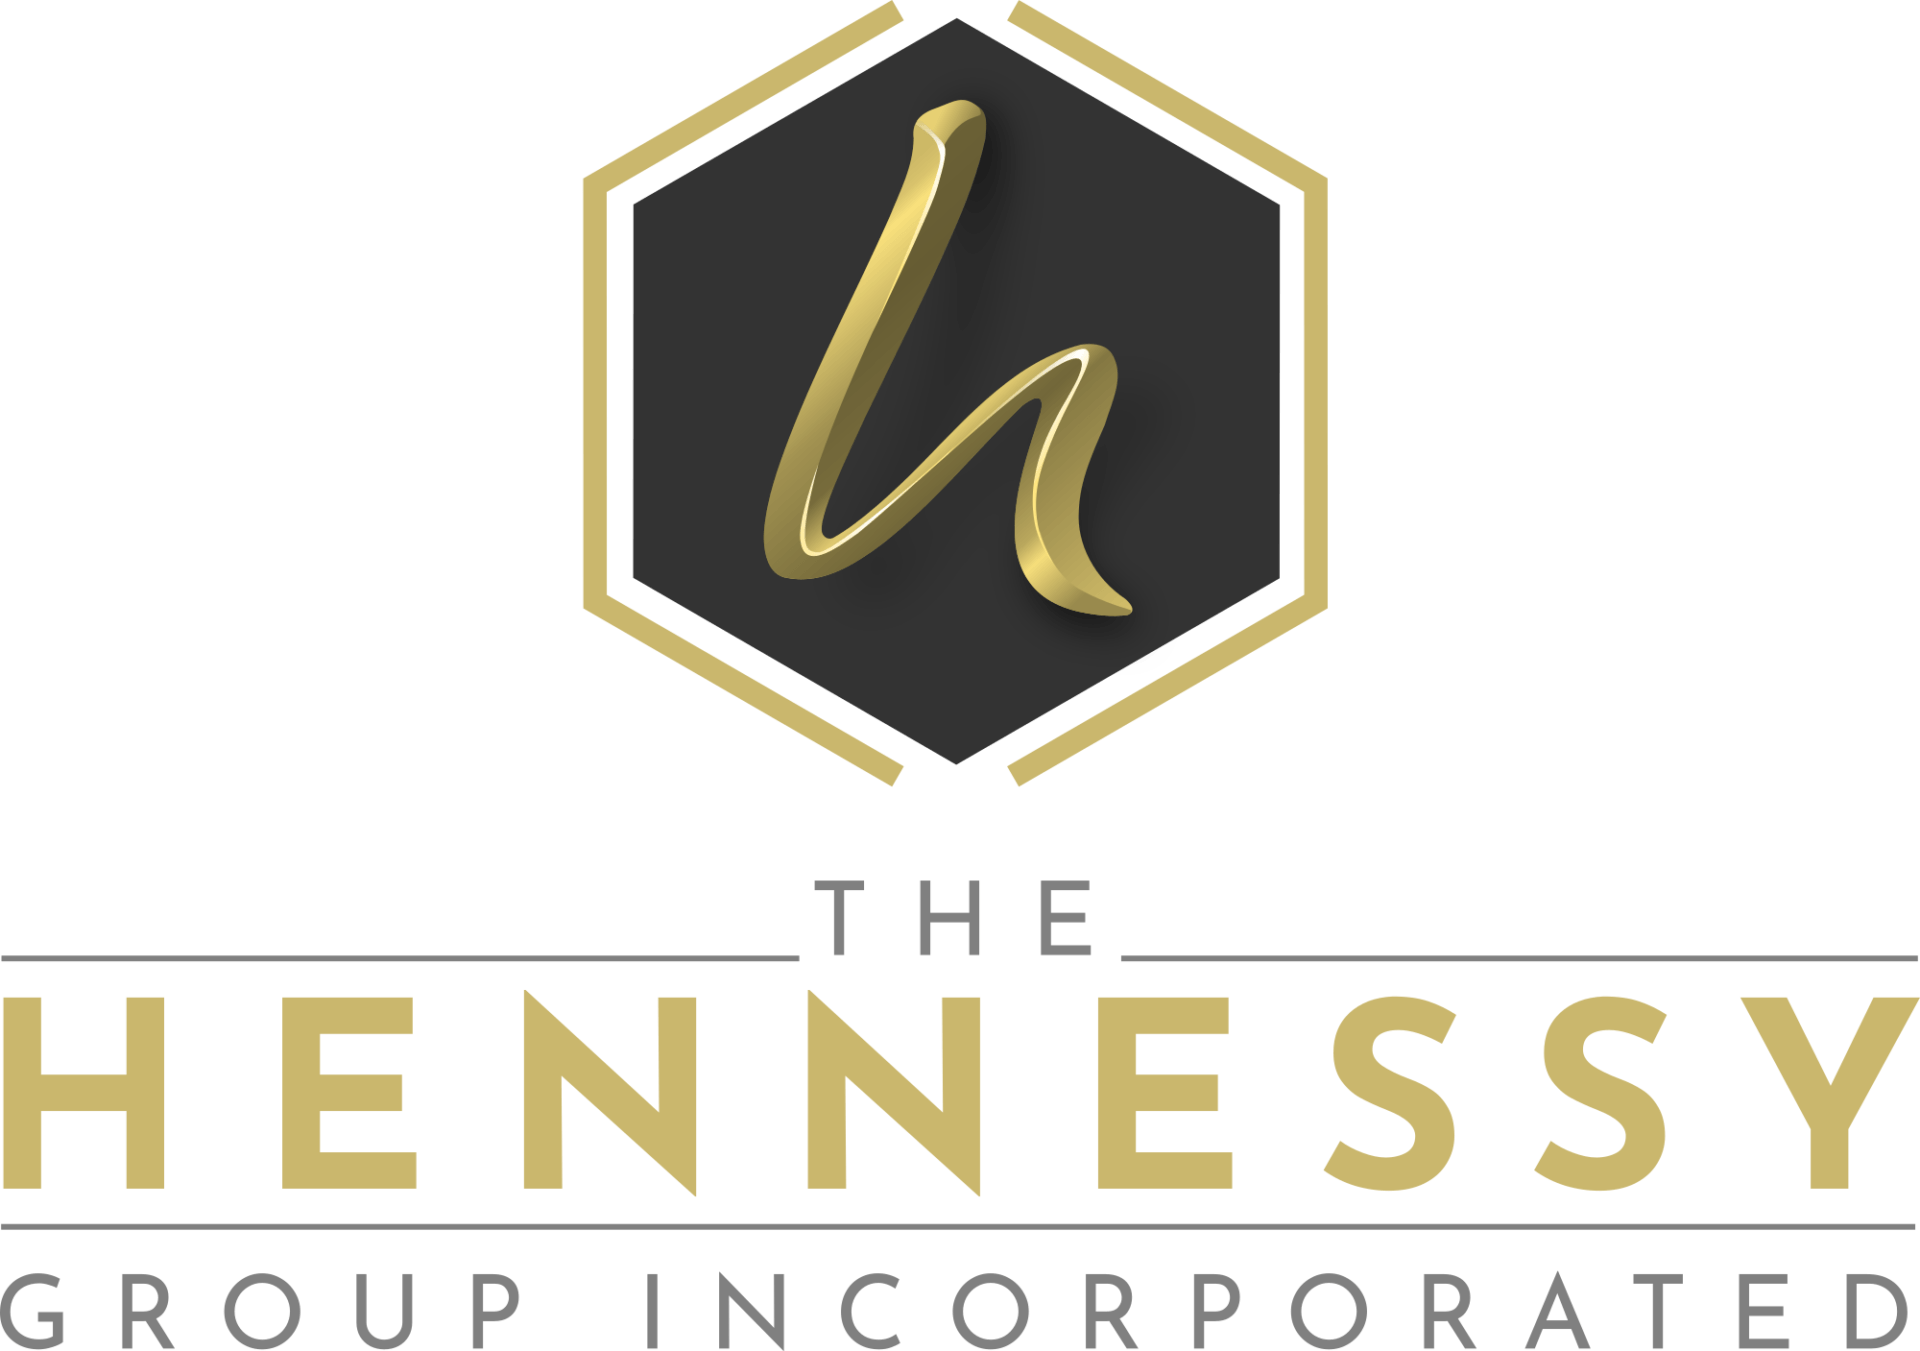 After 21 years, The Hennessy Group gets a new look! The Hennessy Group